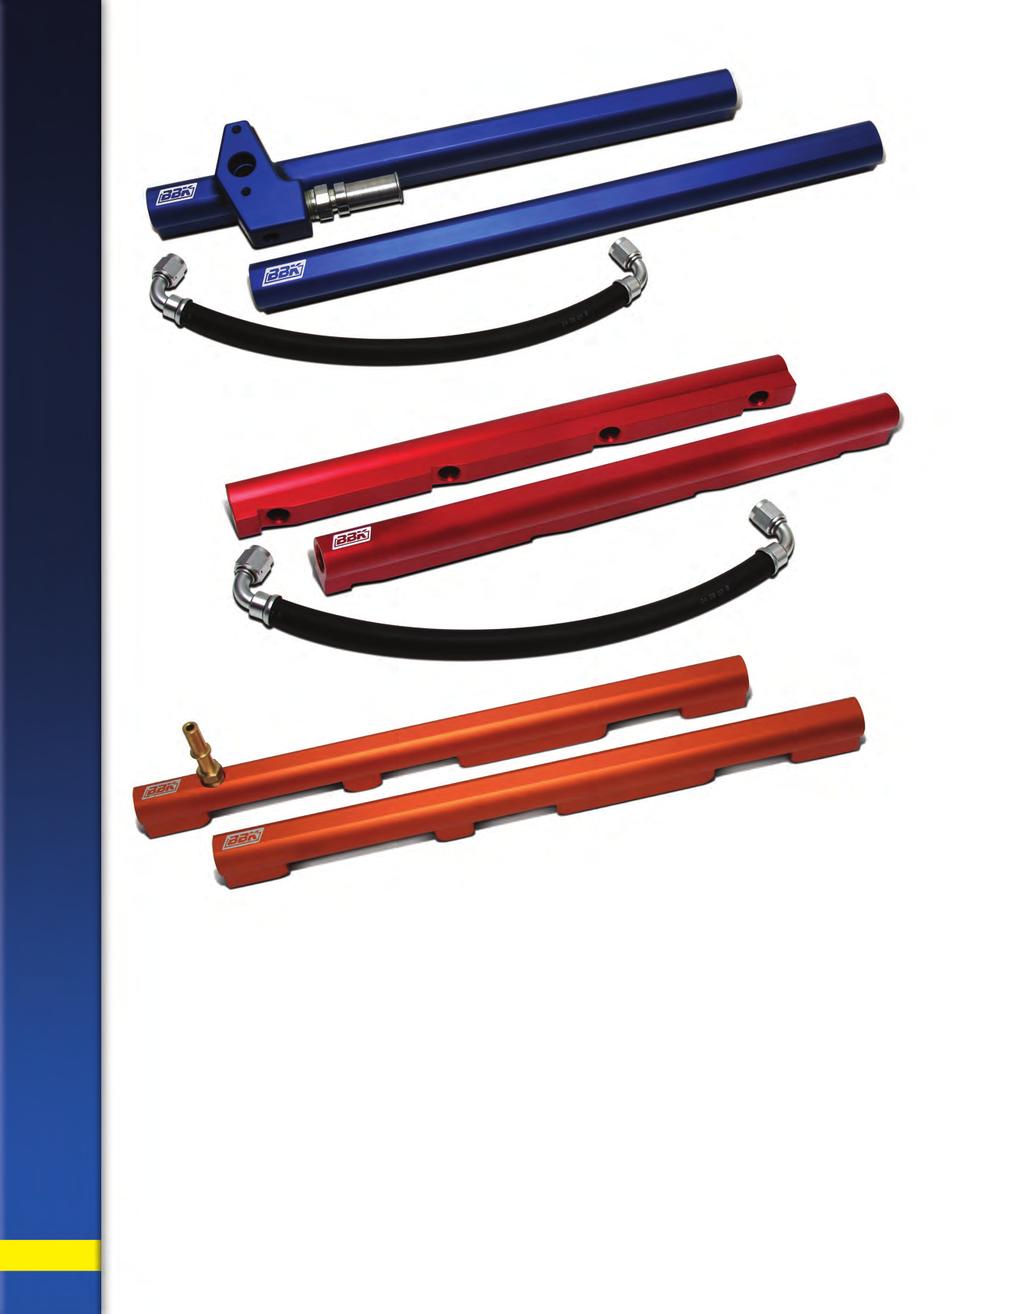 HIGH FLOW FUEL RAIL KITS GM FORD dodge 24 HIGH FLOW BILLET ALUMINUM FUEL RAIL SYSTEMS Built from lightweight CNC machined extruded aircraft quality aluminum, these new high-flow fuel rail systems